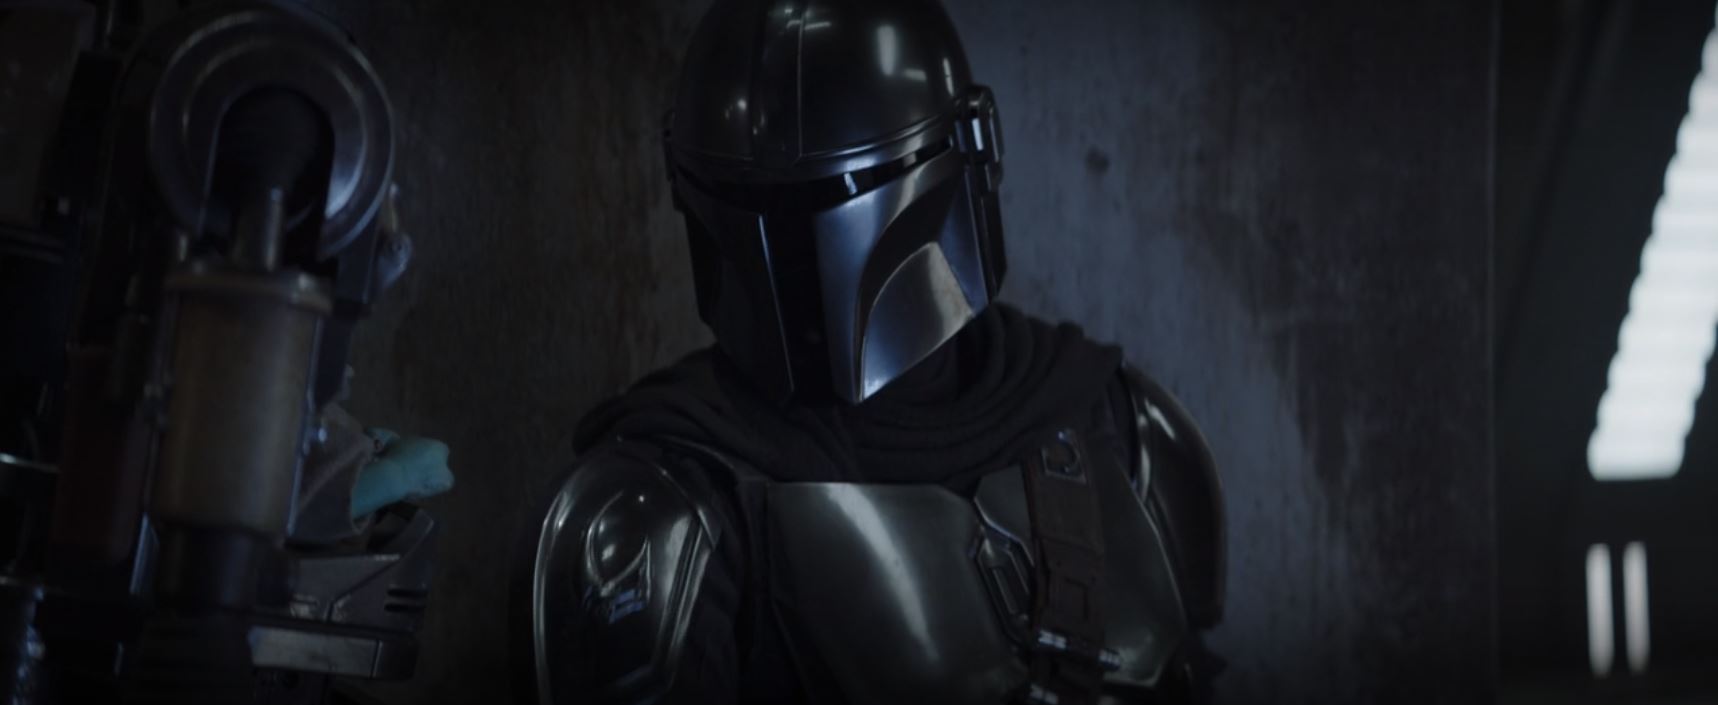 Pedro Pascal as Din Djarin in The Mandalorian 3x08. Courtesy of Lucasfilm and Disney Plus.